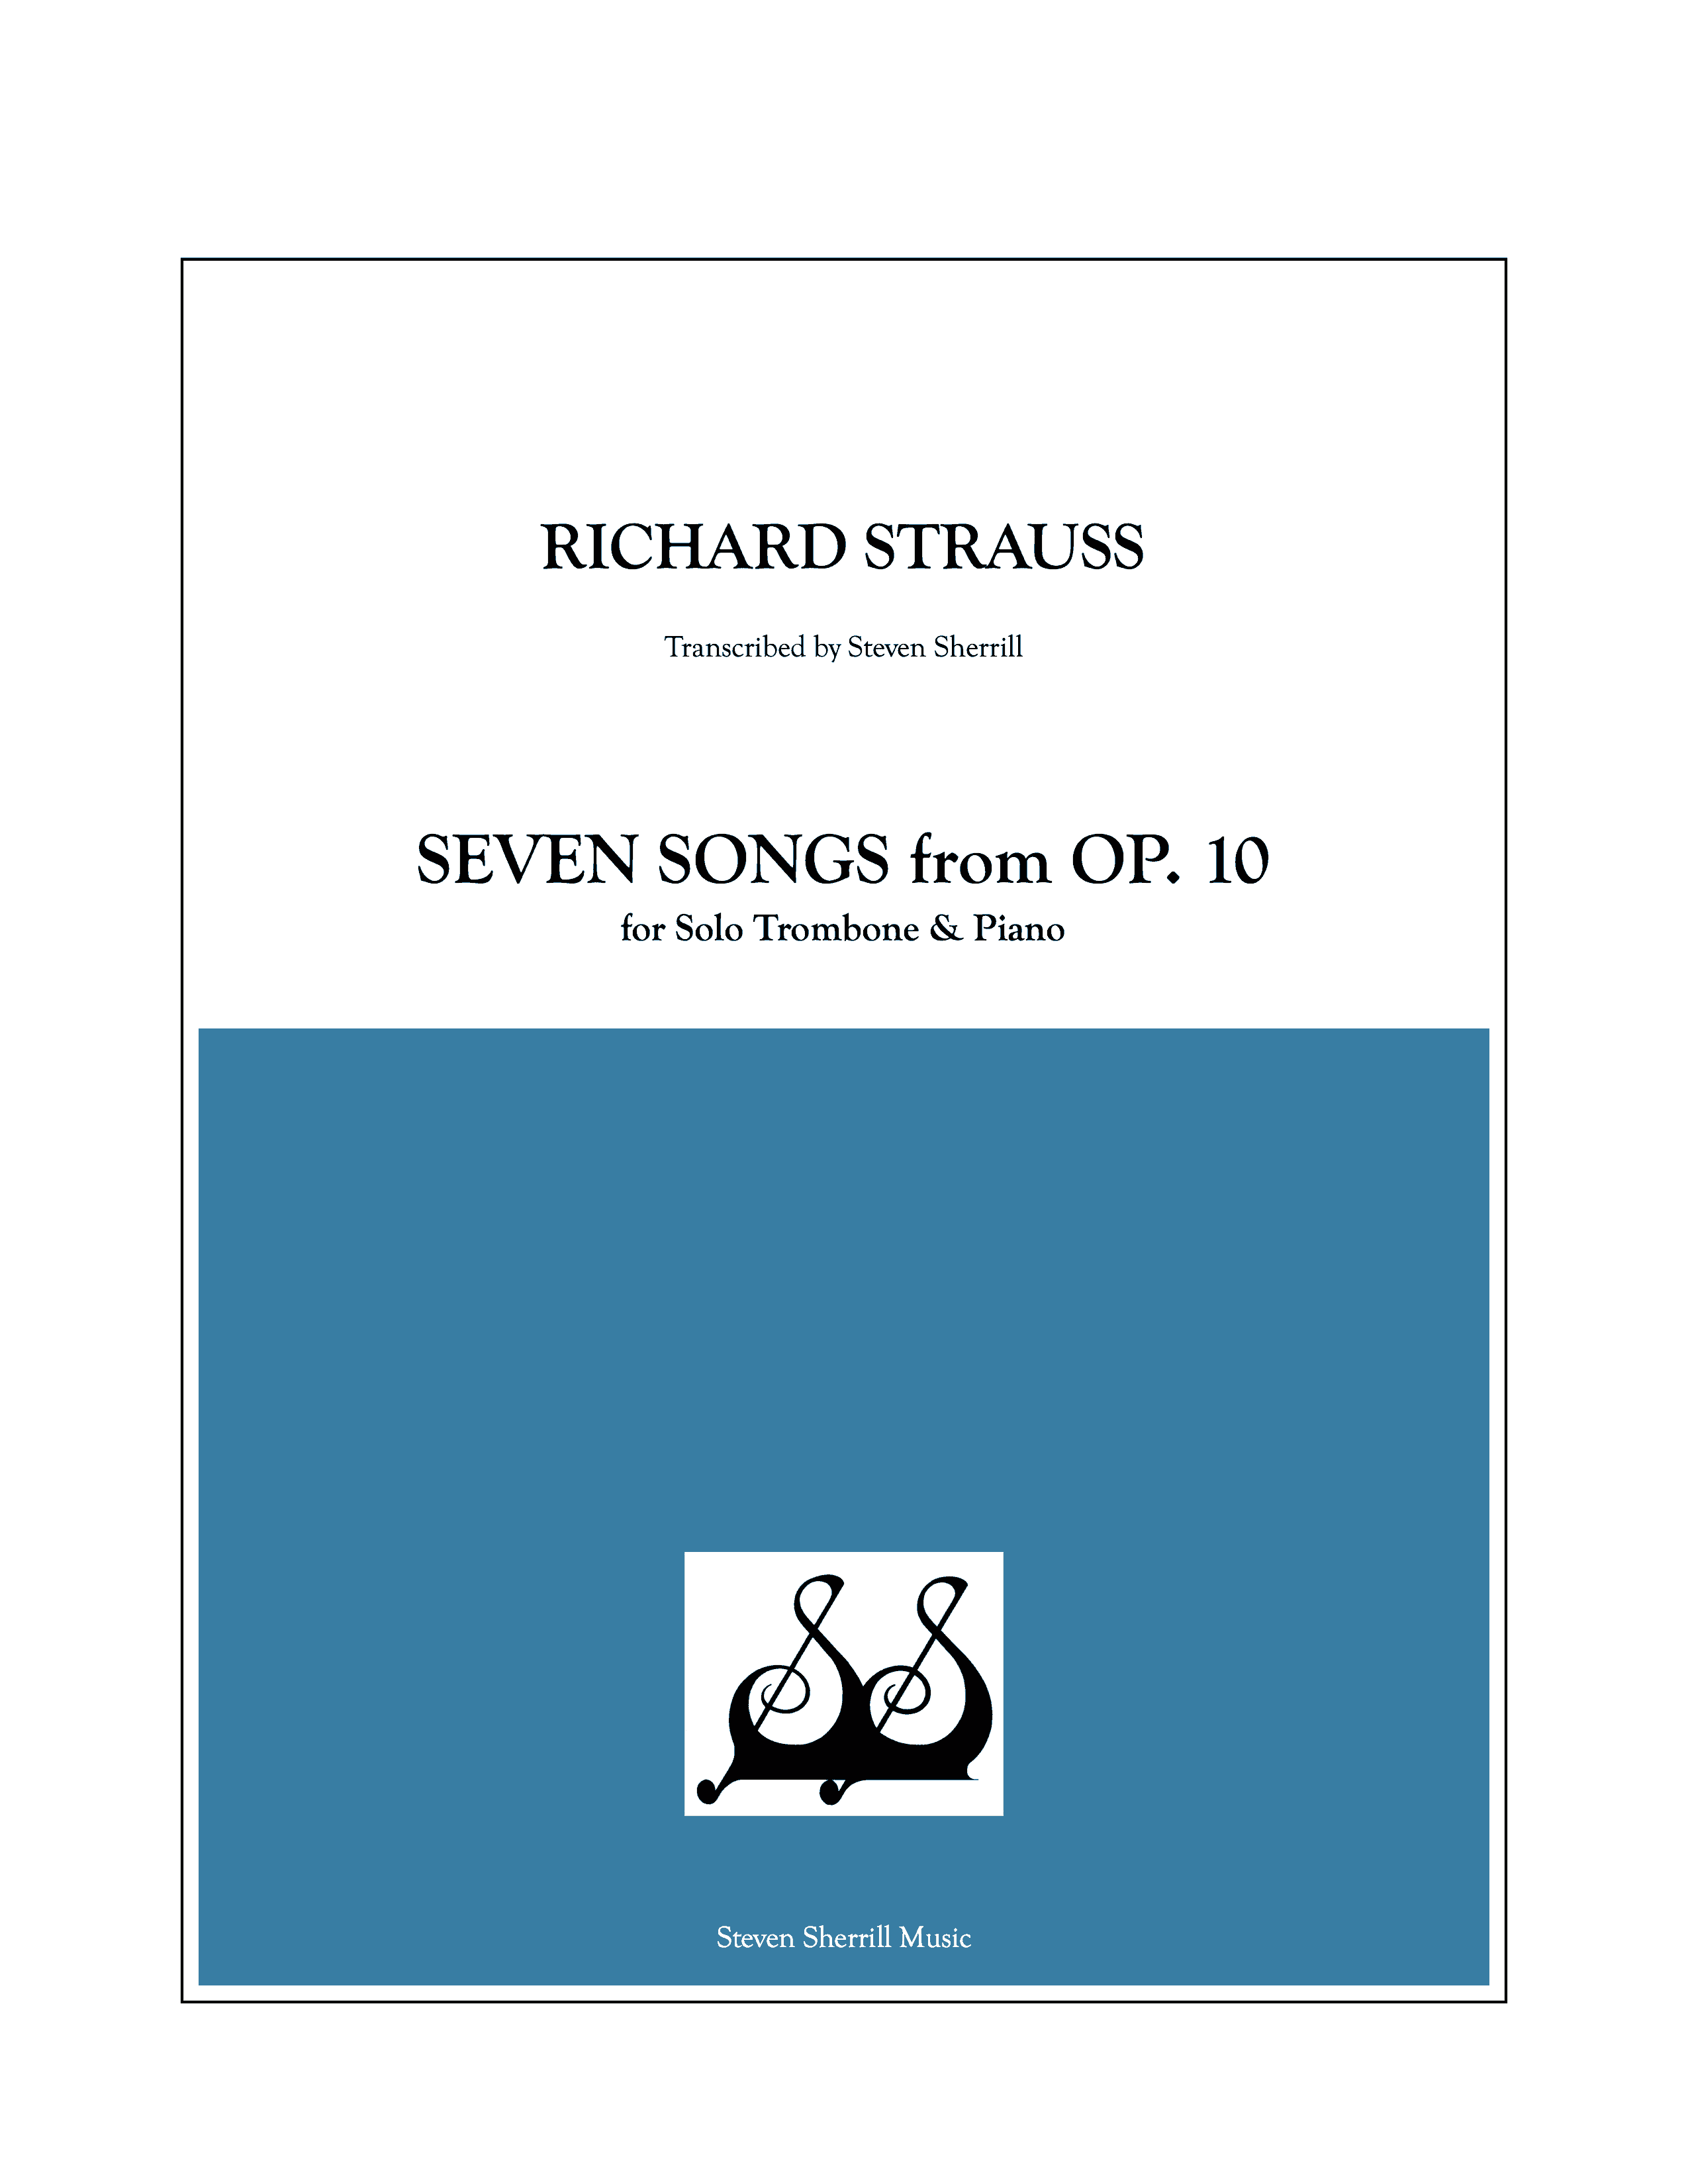 Seven Songs from Opus 10 by Richard Strauss cover page